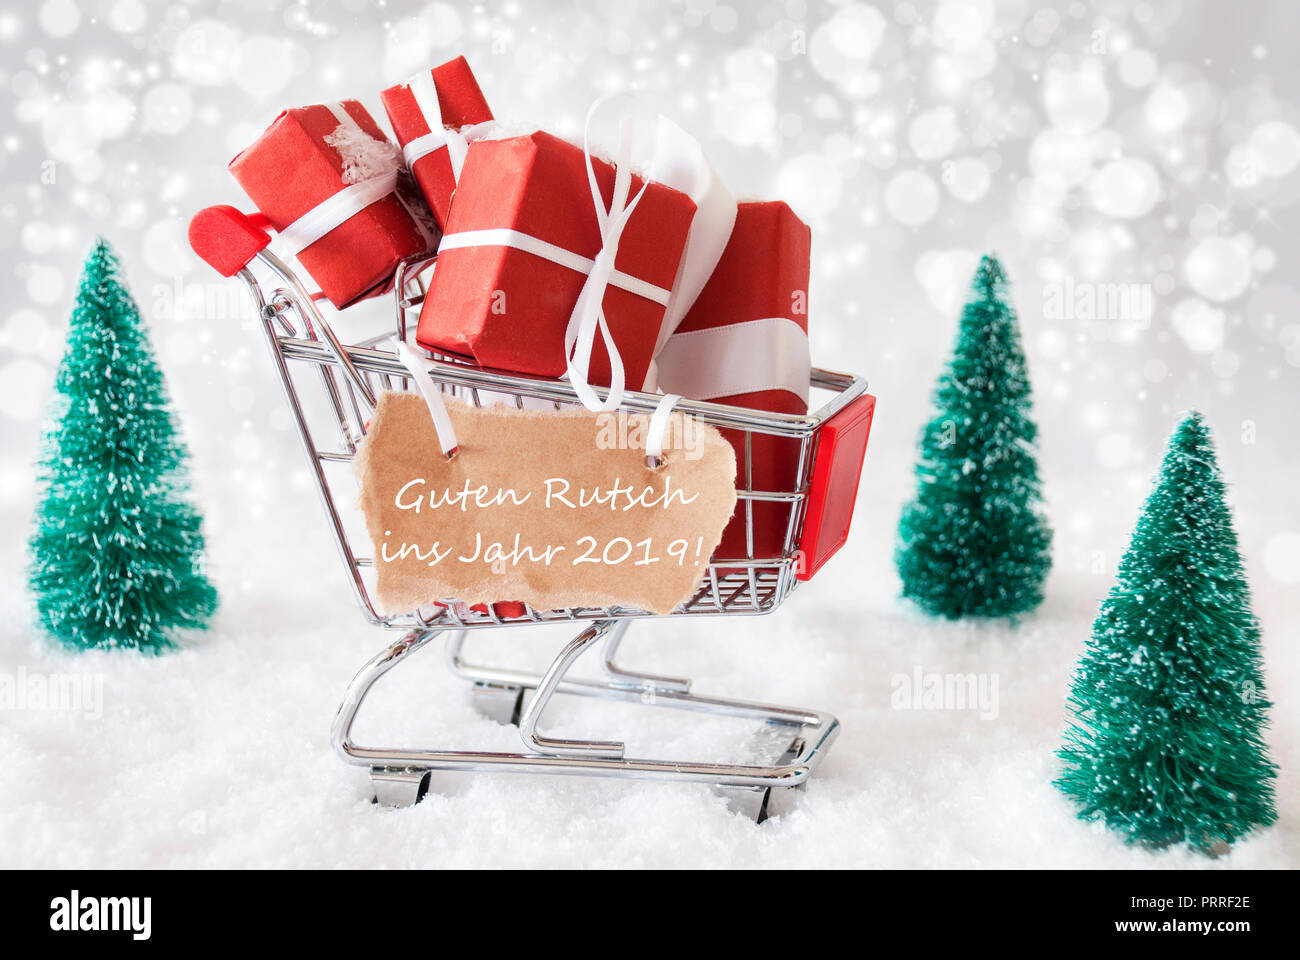 Trolly With Christmas Gifts, Guten Rutsch 2019 Means New Year Stock Photo